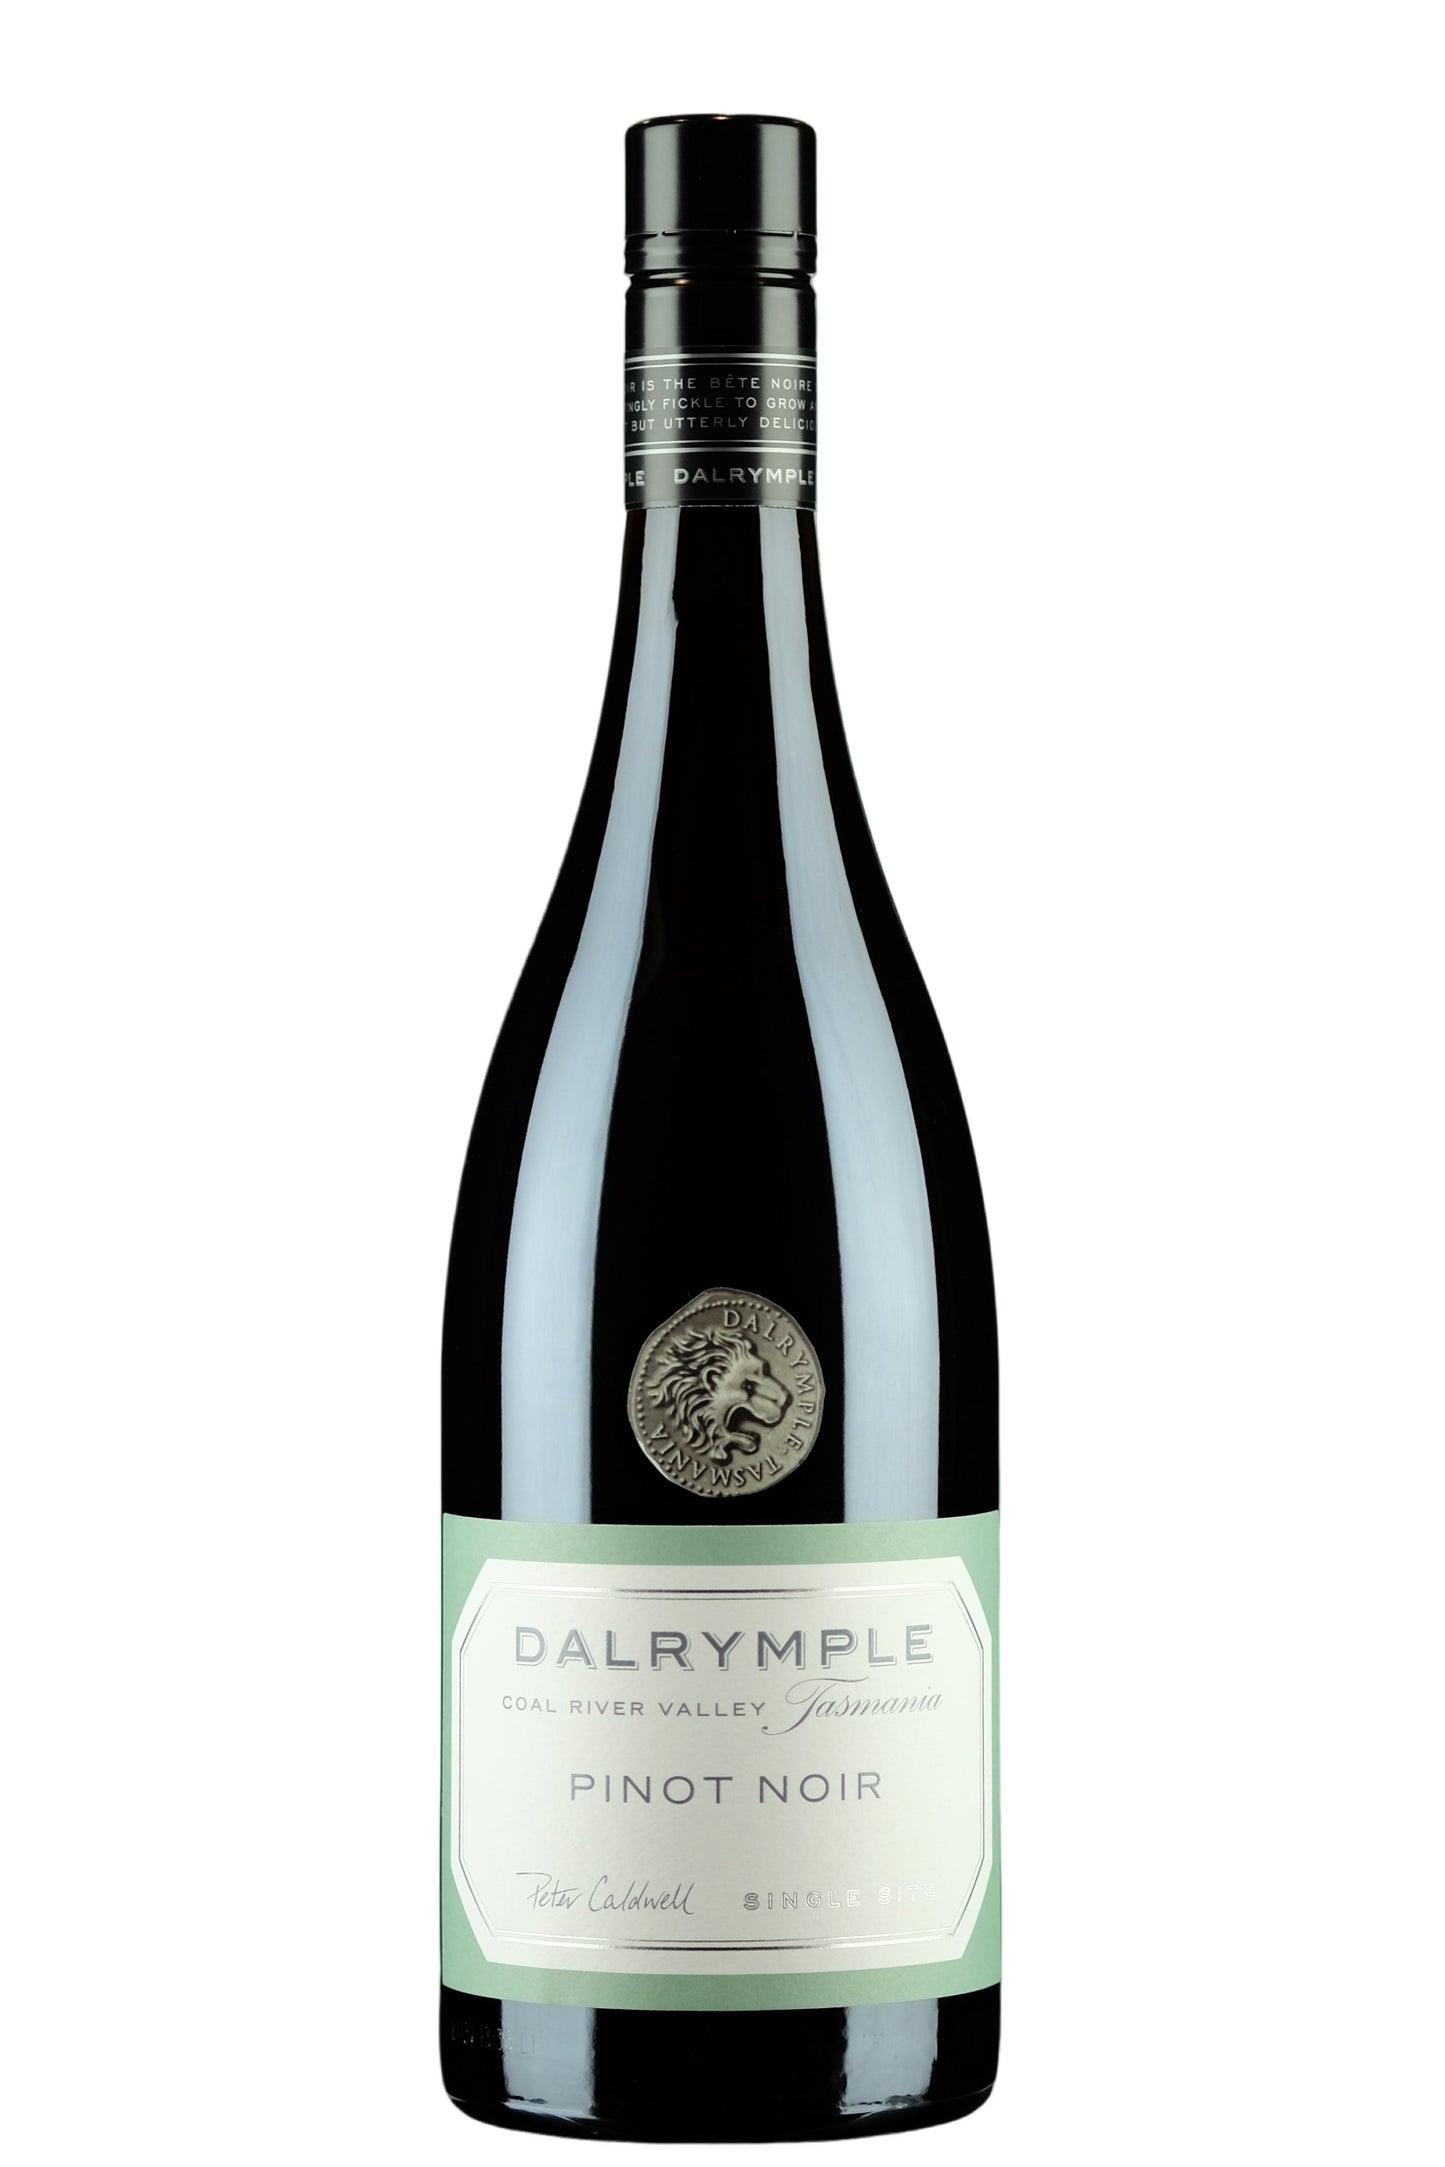 Dalrymple Single Site Coal River Valley Pinot Noir